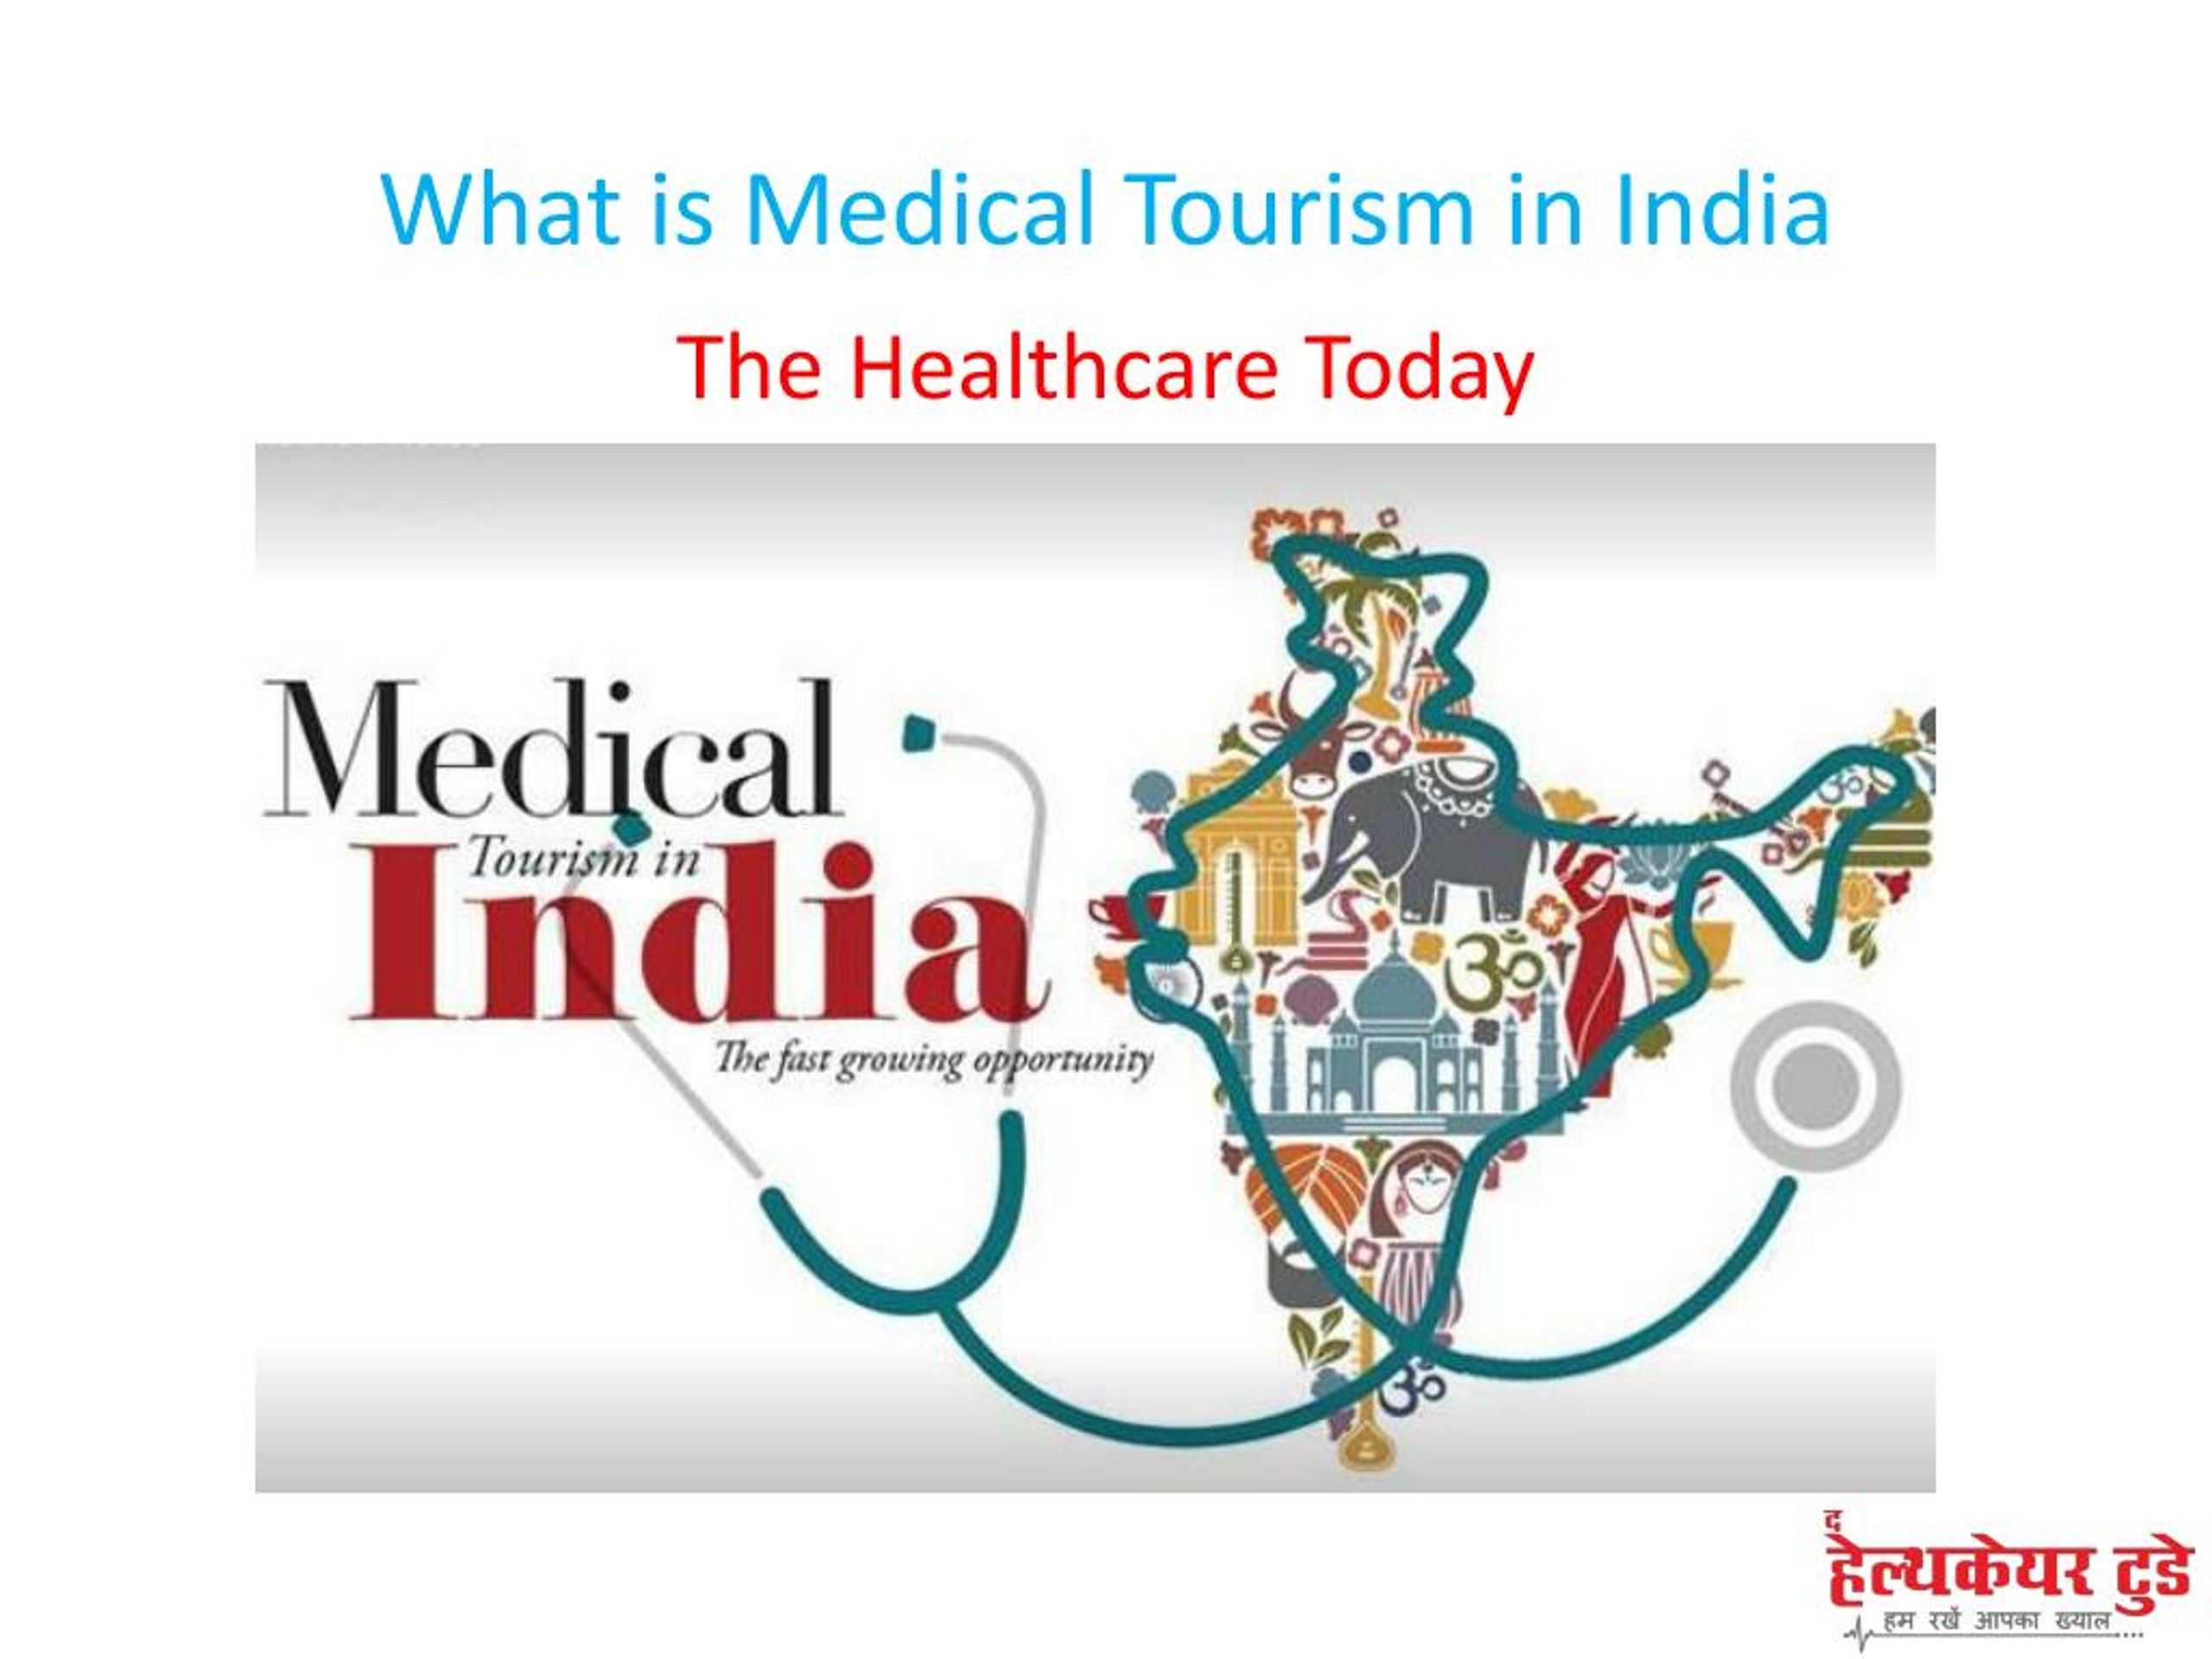 medical tourism in india ppt